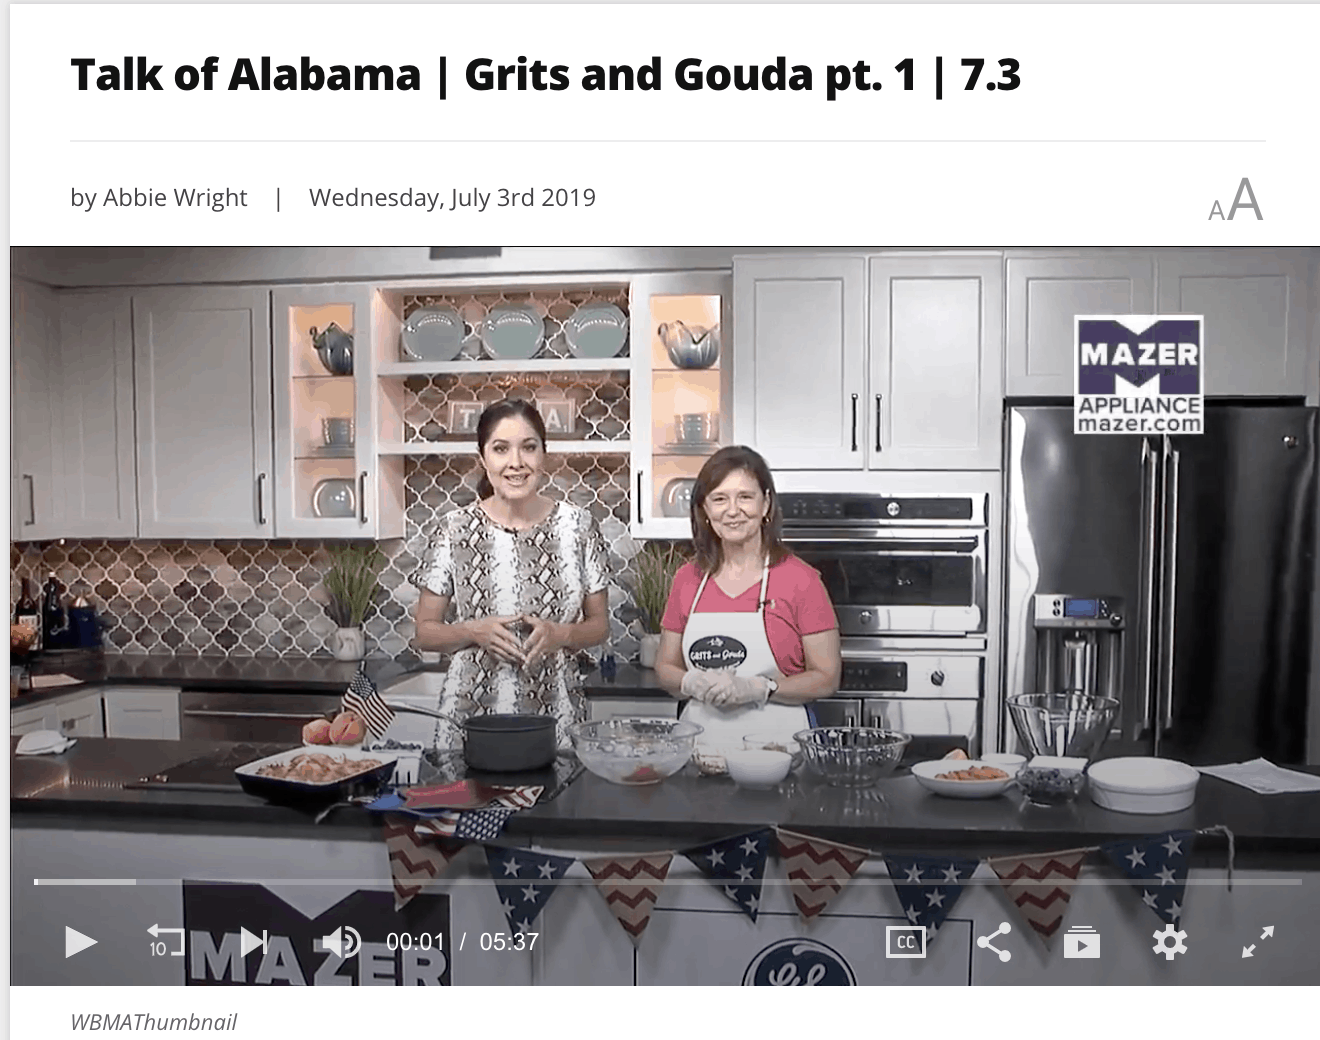 Picture of Kathleen Royal Phillips and Nicole Allshouse on Talk of Alabama making blueberry peach cobbler